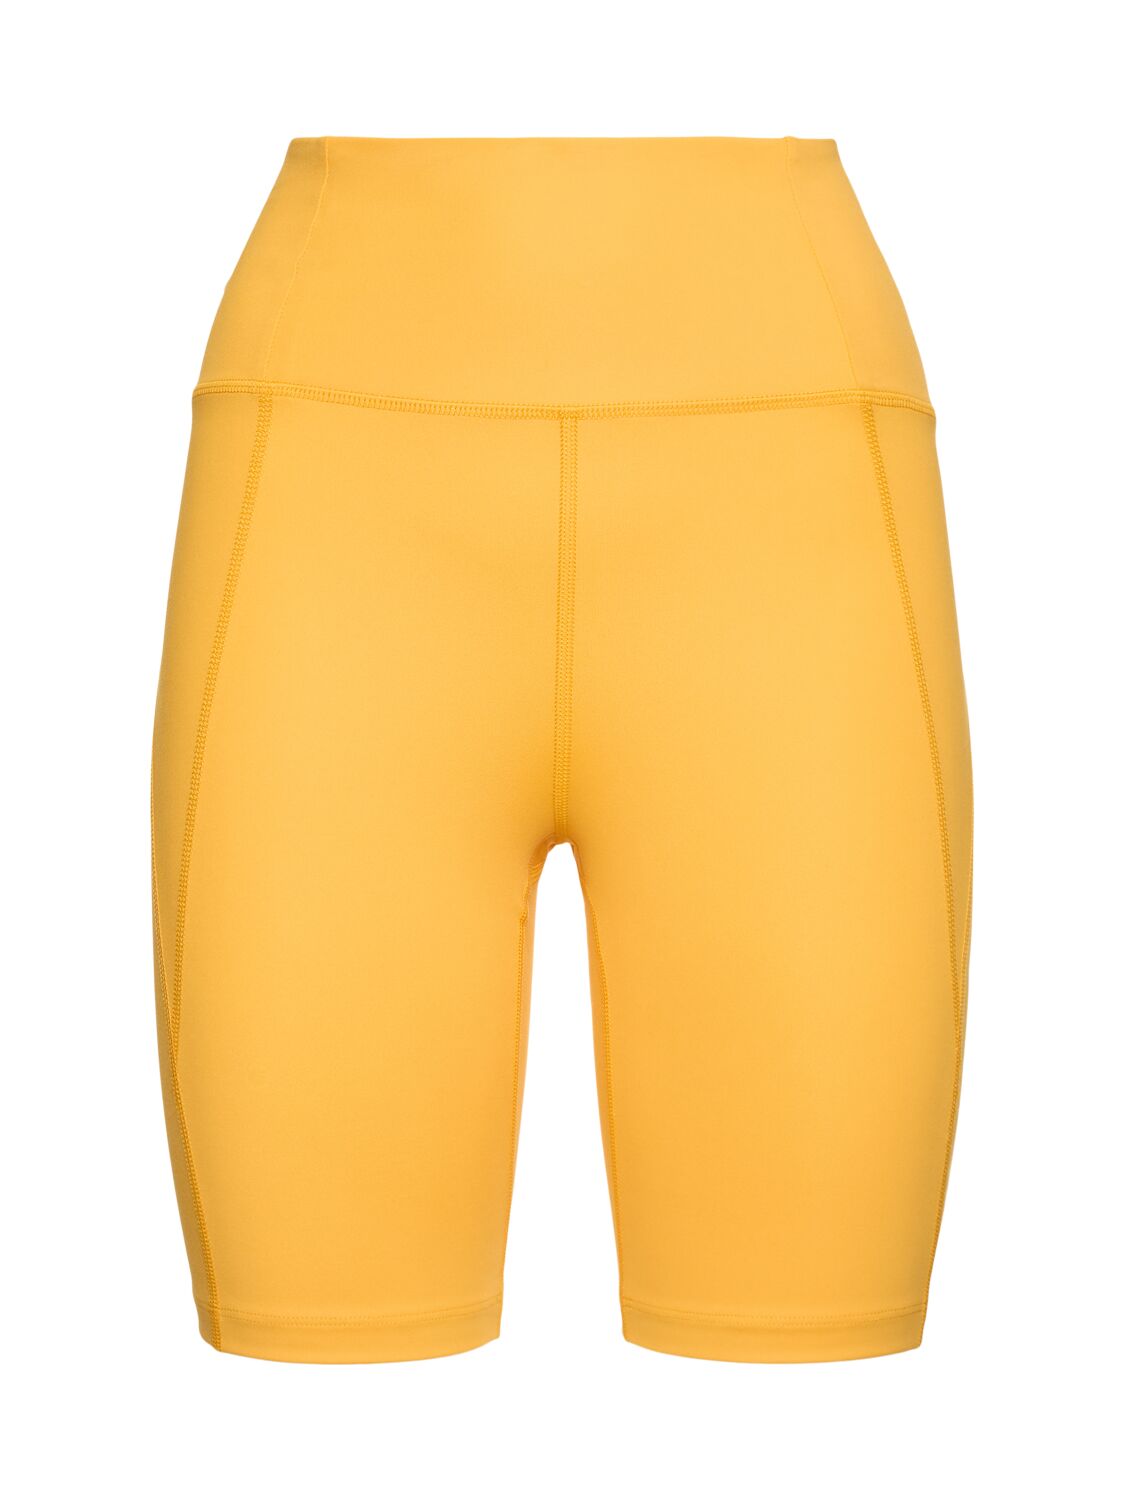 Girlfriend Collective High Rise Stretch Tech Running Shorts In Yellow